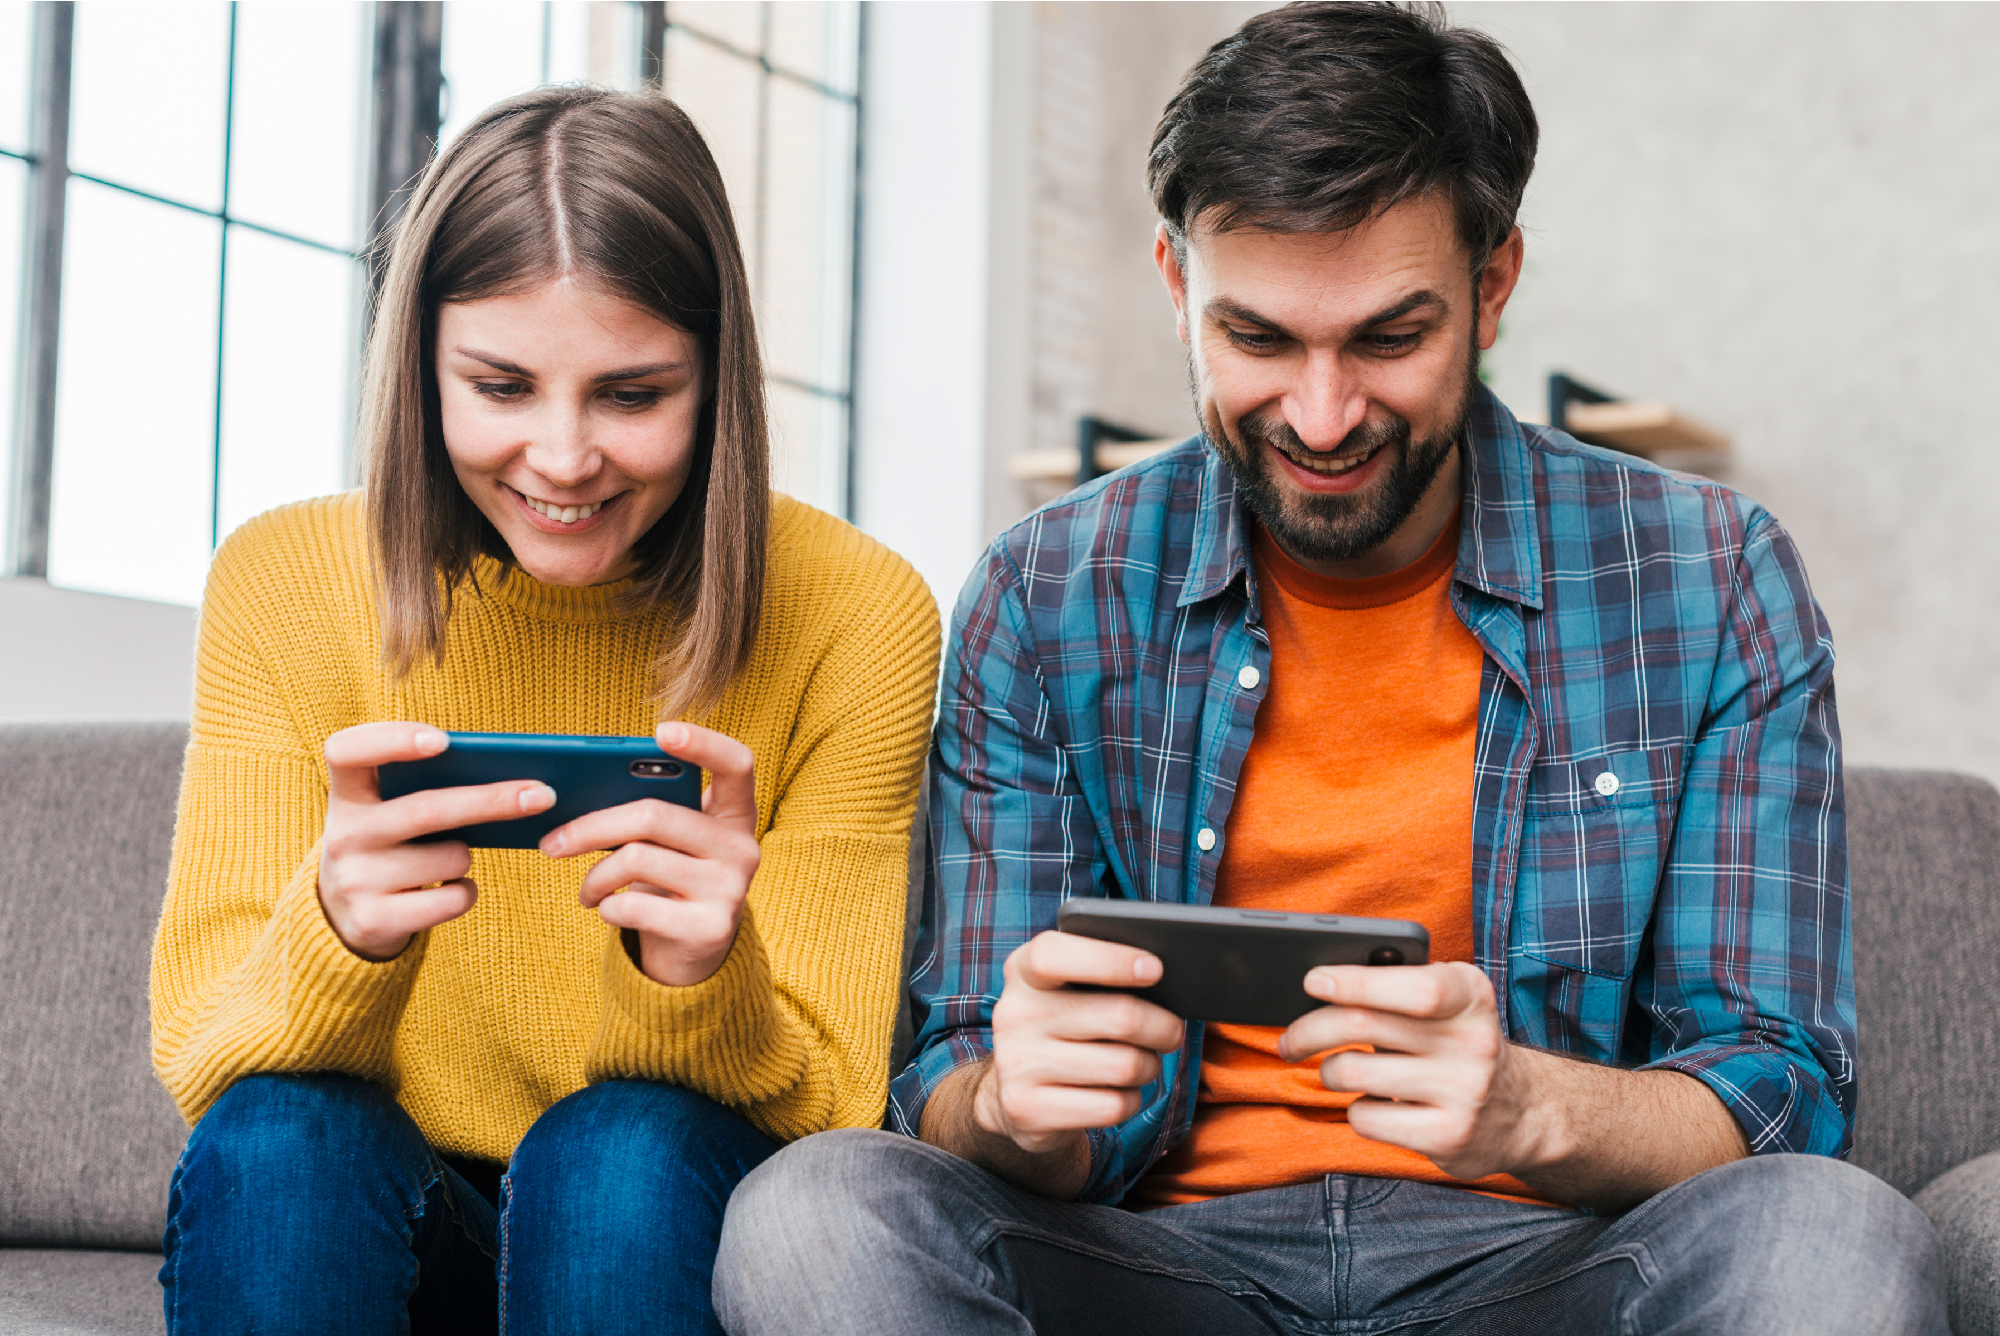 How mobile gaming has changed in the years